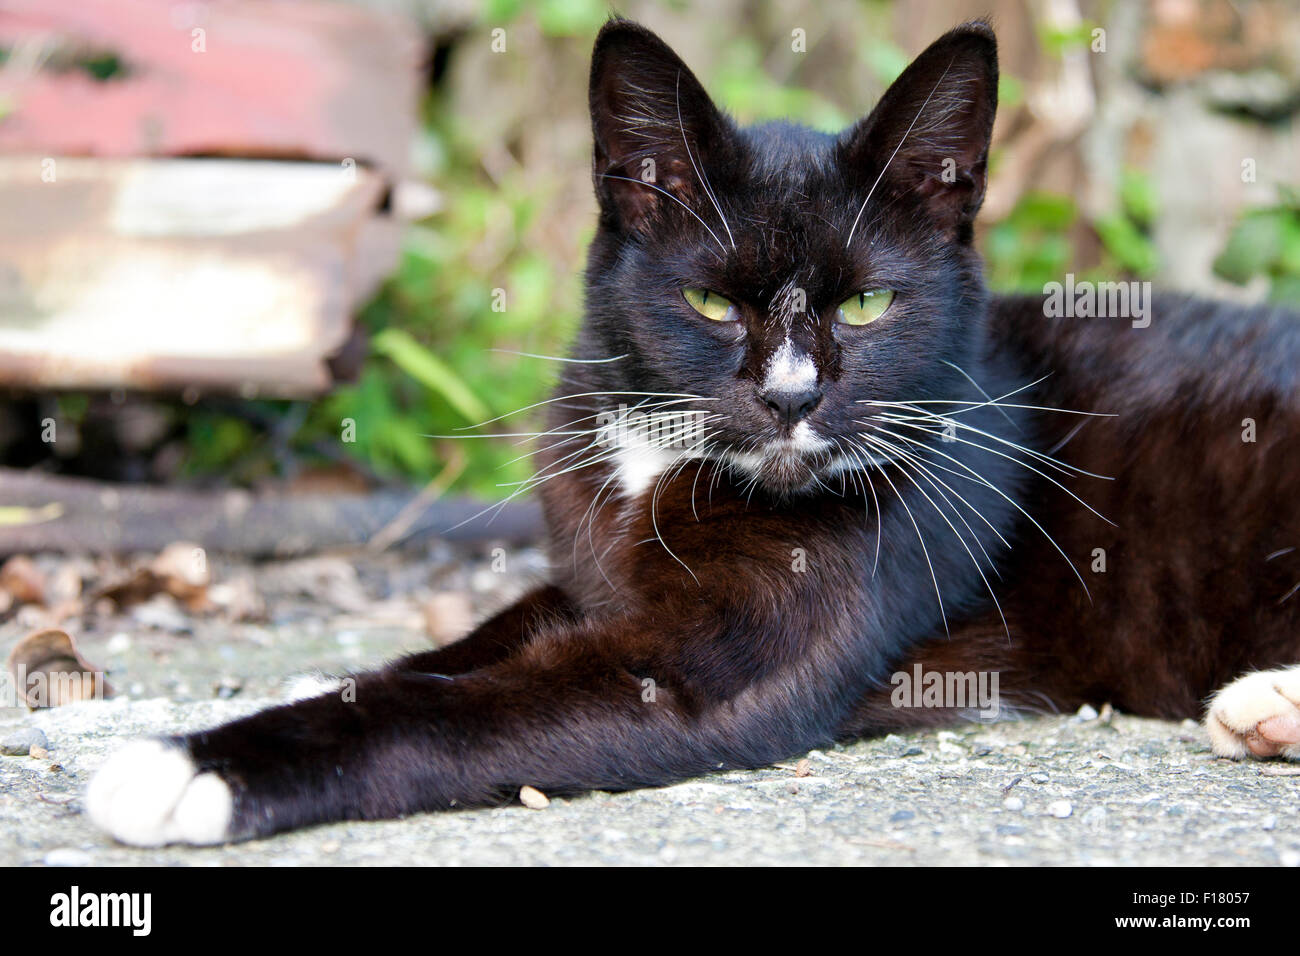 portrait of a cute black cat looking ahead Stock Photo